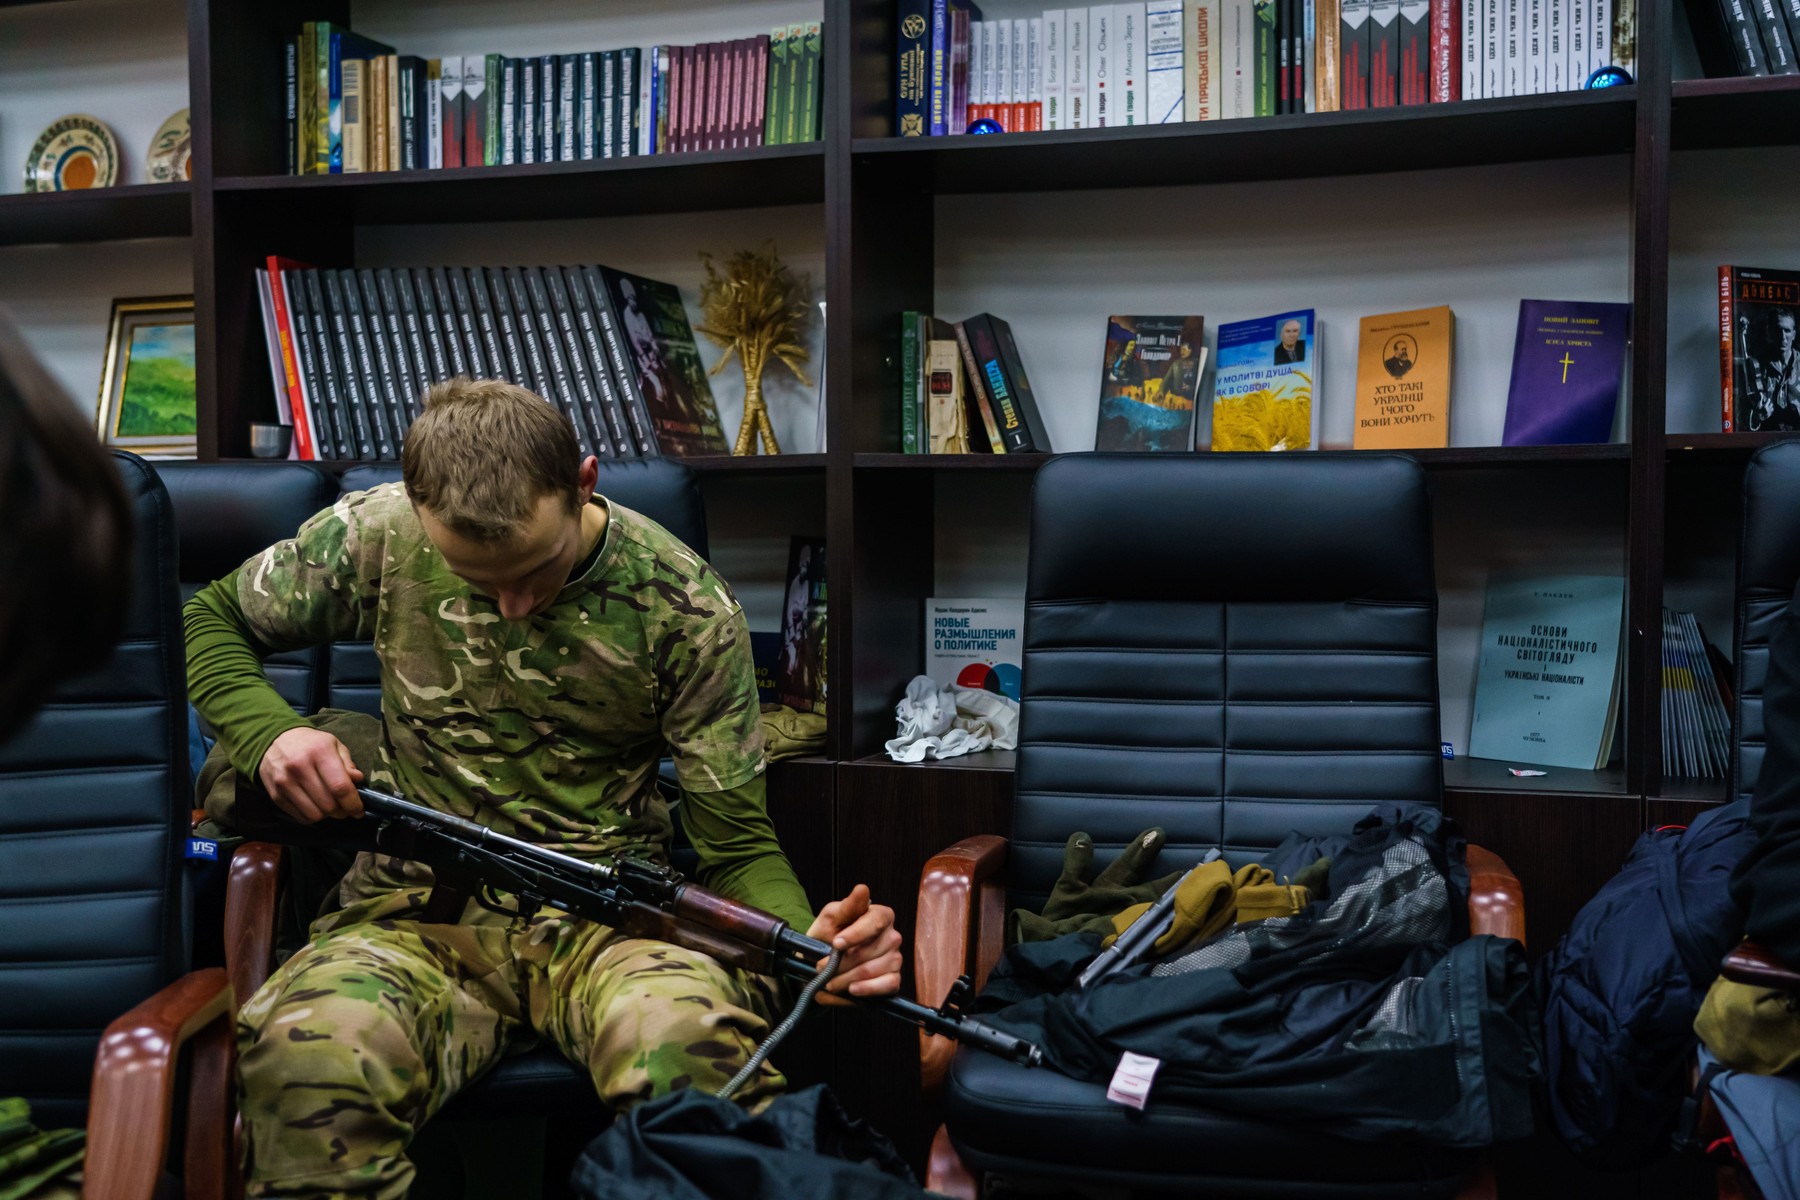 Volunteers from the Territorial Defense Units gather in an outpost to collect weapons, train and get their assignments in Kyiv, Ukraine, Saturday, Feb. 26, 2022. (MARCUS YAM / LOS ANGELES TIMES)
UKRAINE RUSSIA CRISIS, Kyiv, Kyiv Oblast, Ukraine - 26 Feb 2022,Image: 665267680, License: Rights-managed, Restrictions: , Model Release: no, Credit line: Profimedia